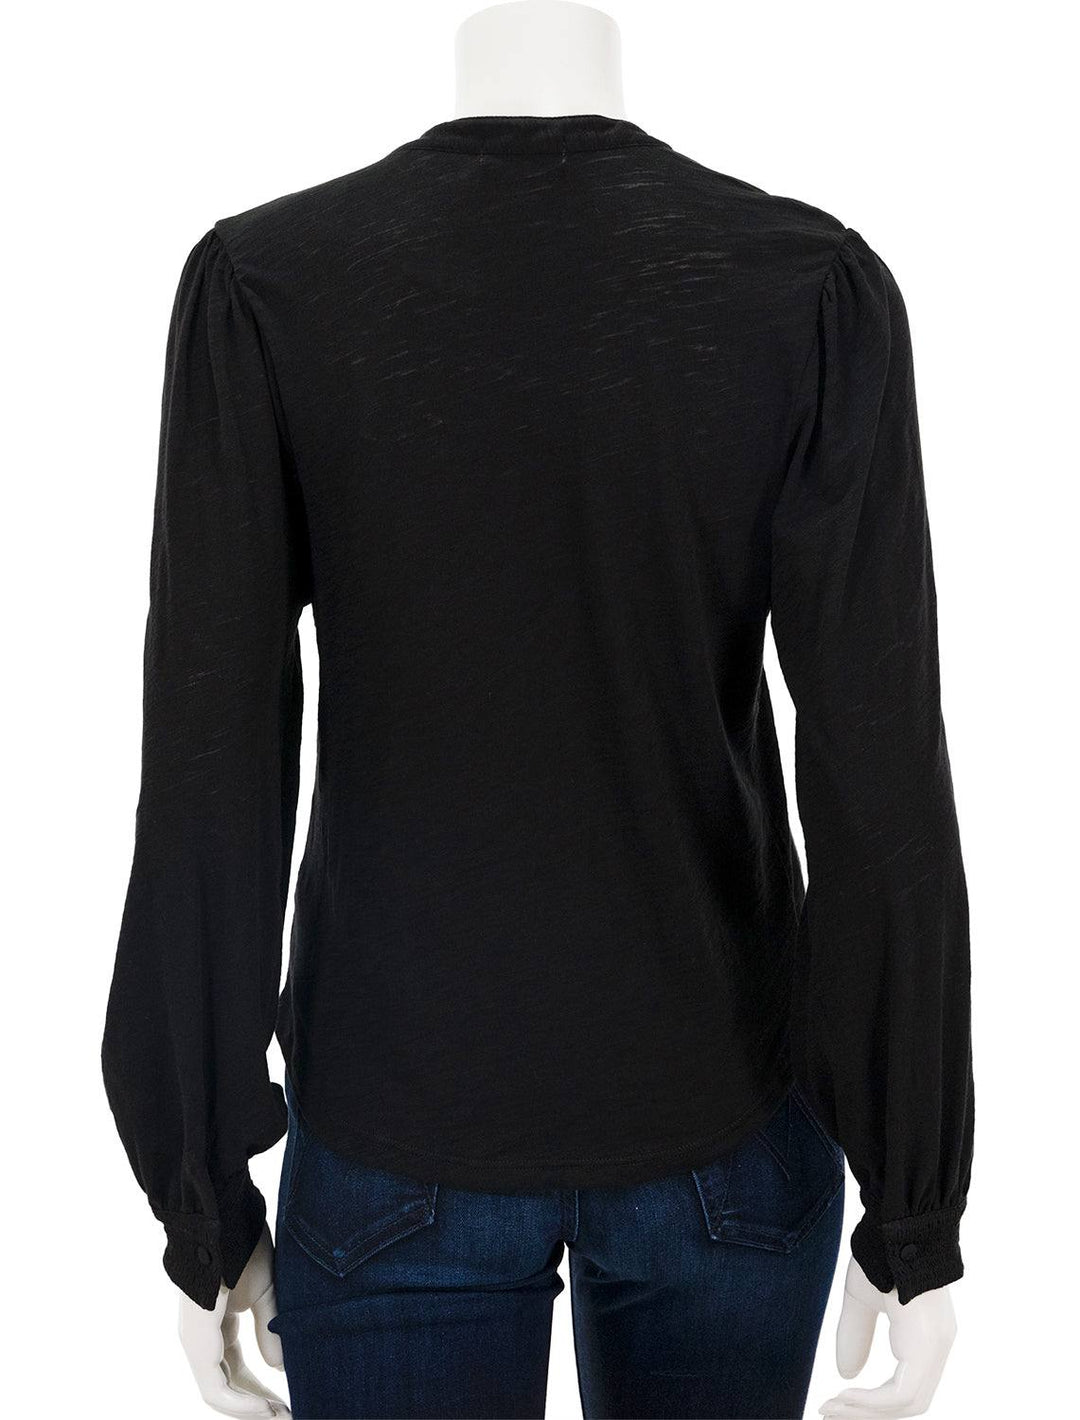 Back view of Goldie Lewinter's peasant blouse with smocking in black.